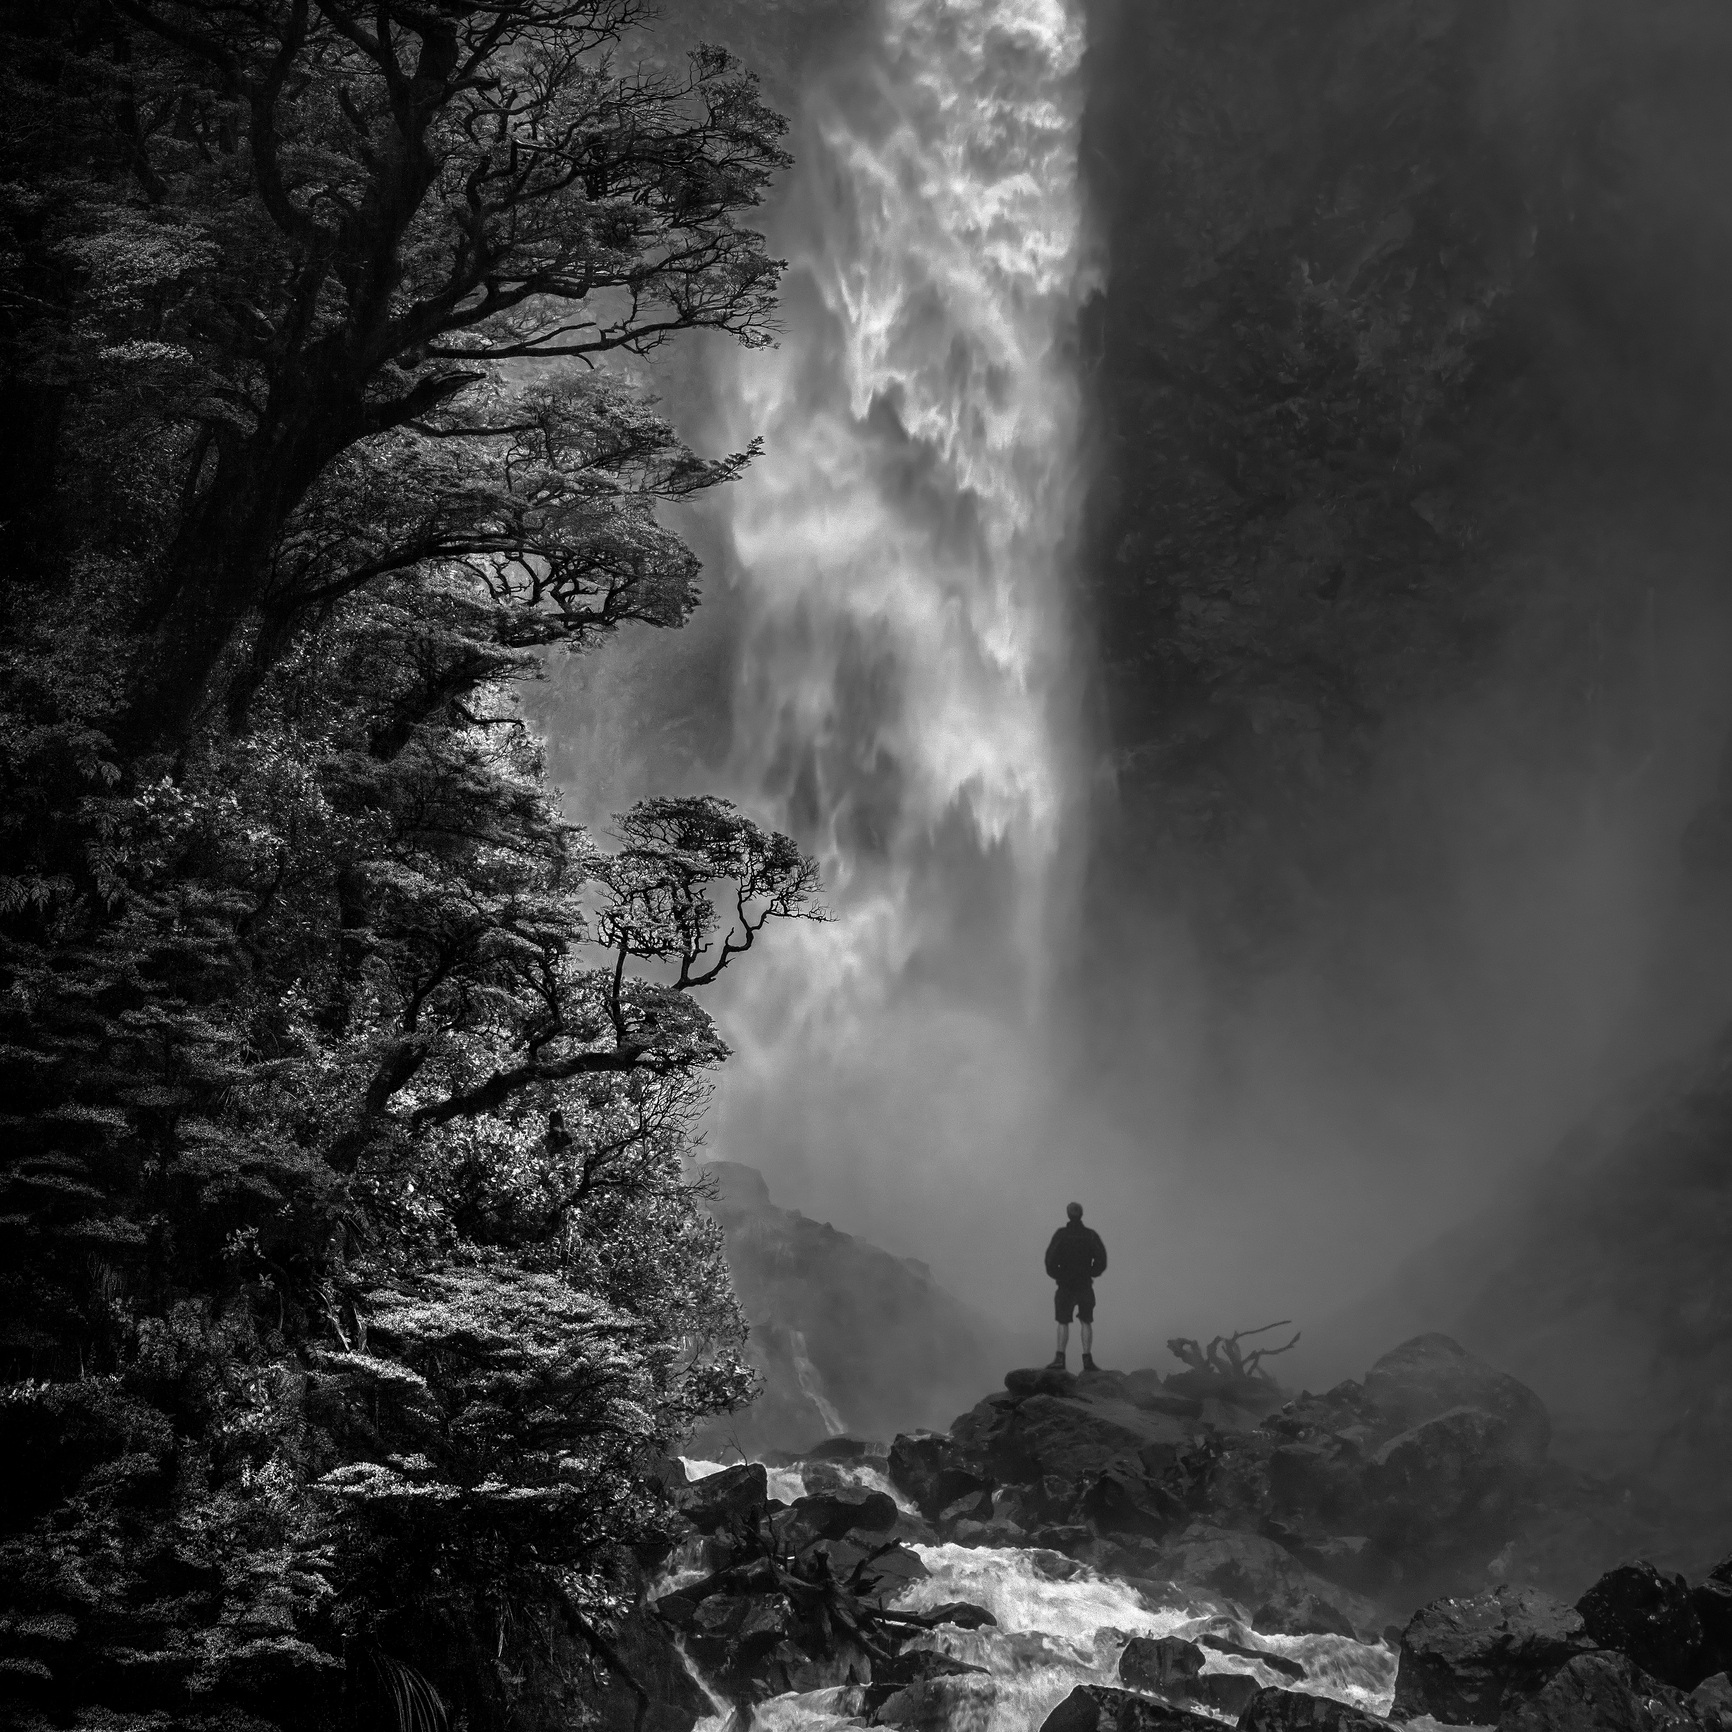 How to Improve Black and White Fine Art Photography